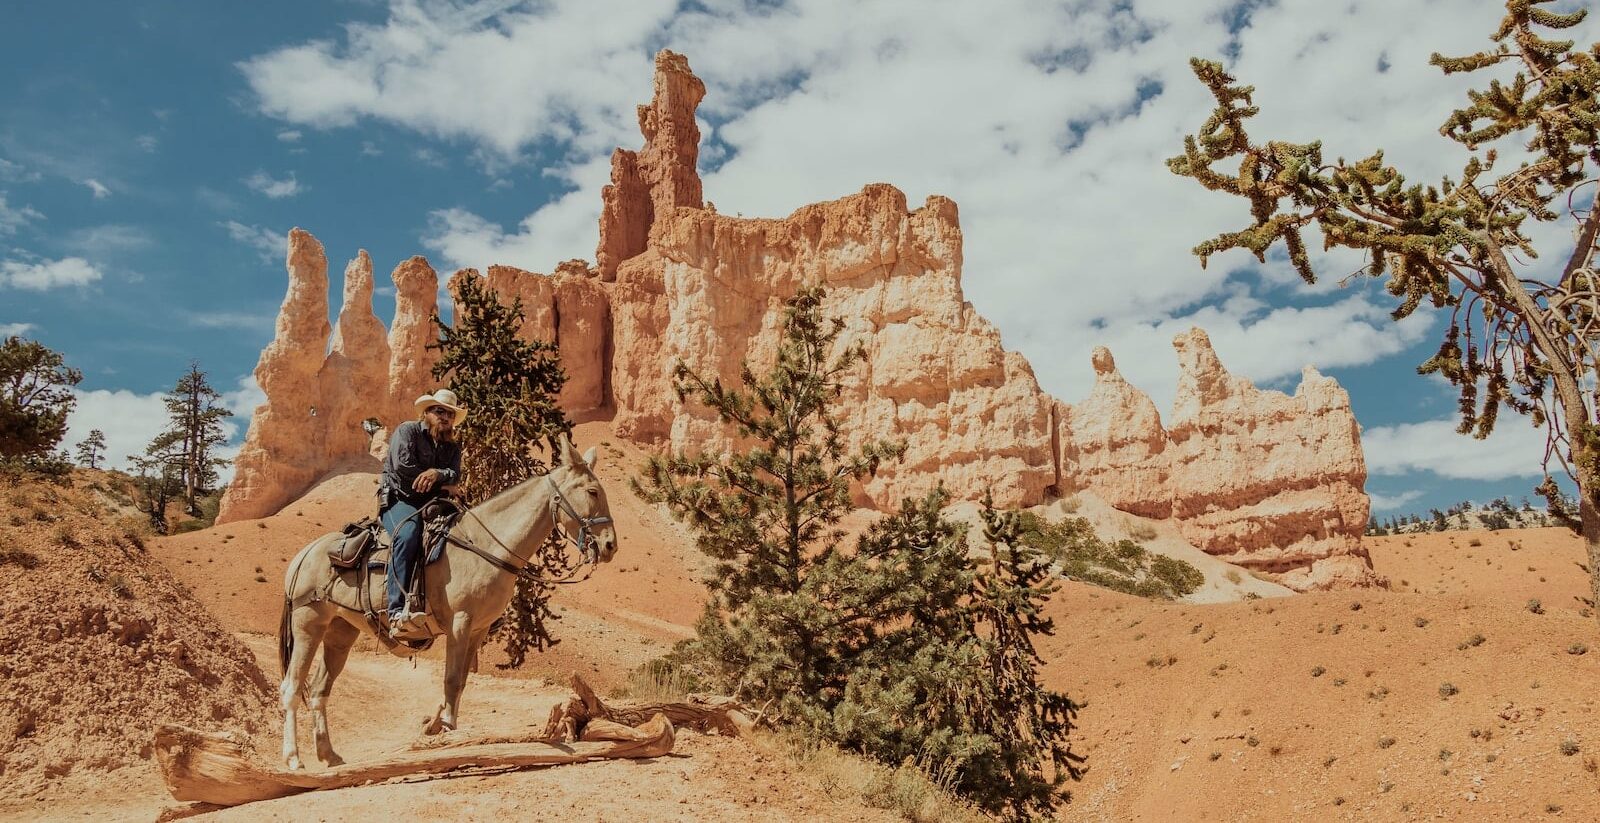 man riding horse on brown rock formation under blue sky and white clouds during daytime